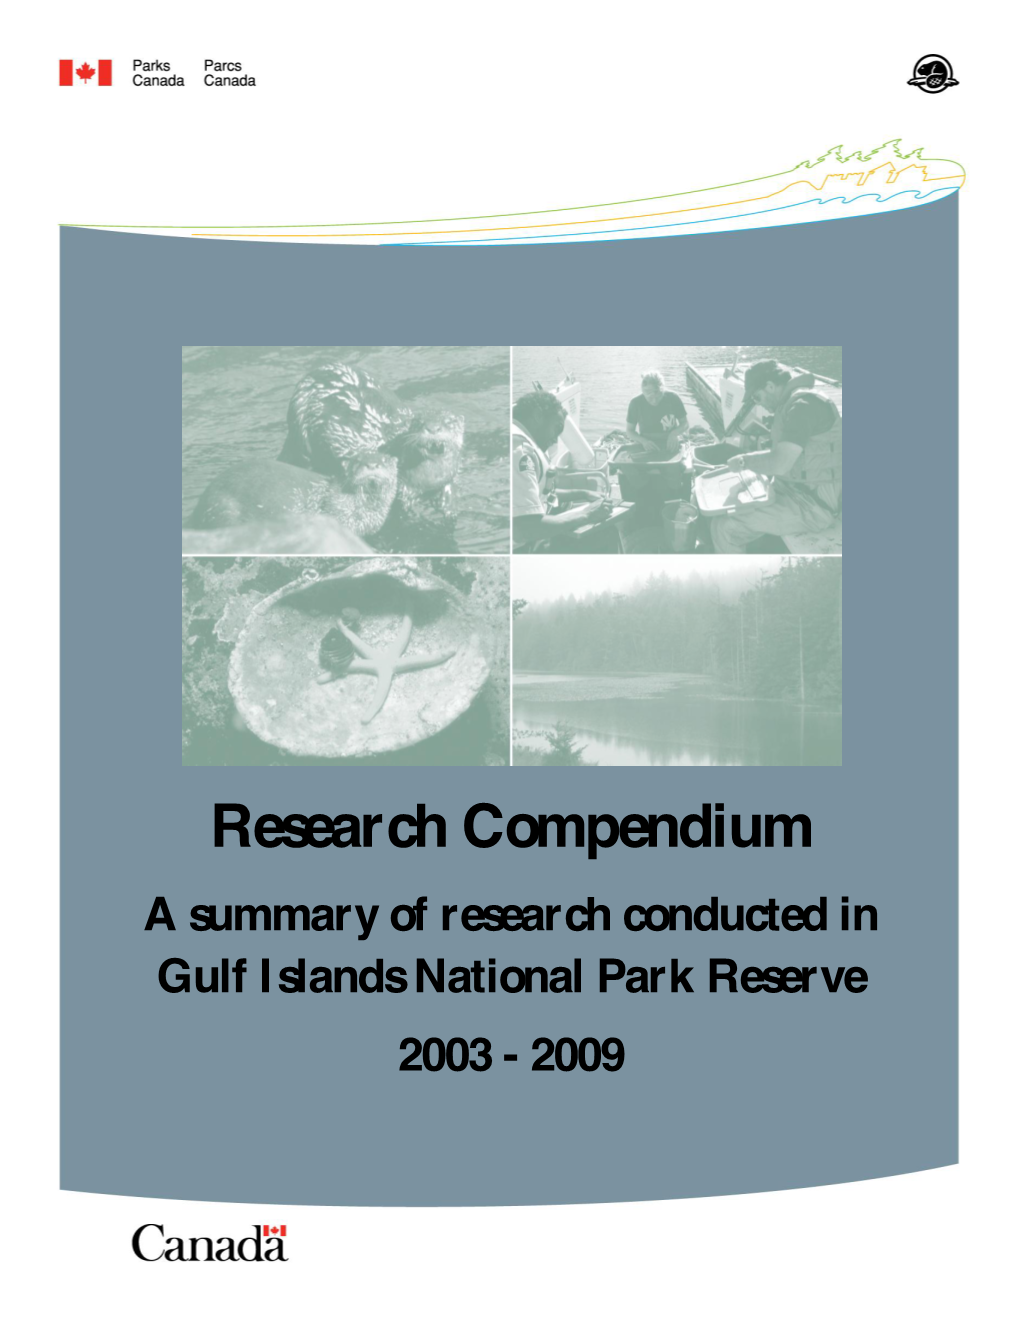 Research Compendium a Summary of Research Conducted in Gulf Islands National Park Reserve 2003 - 2009